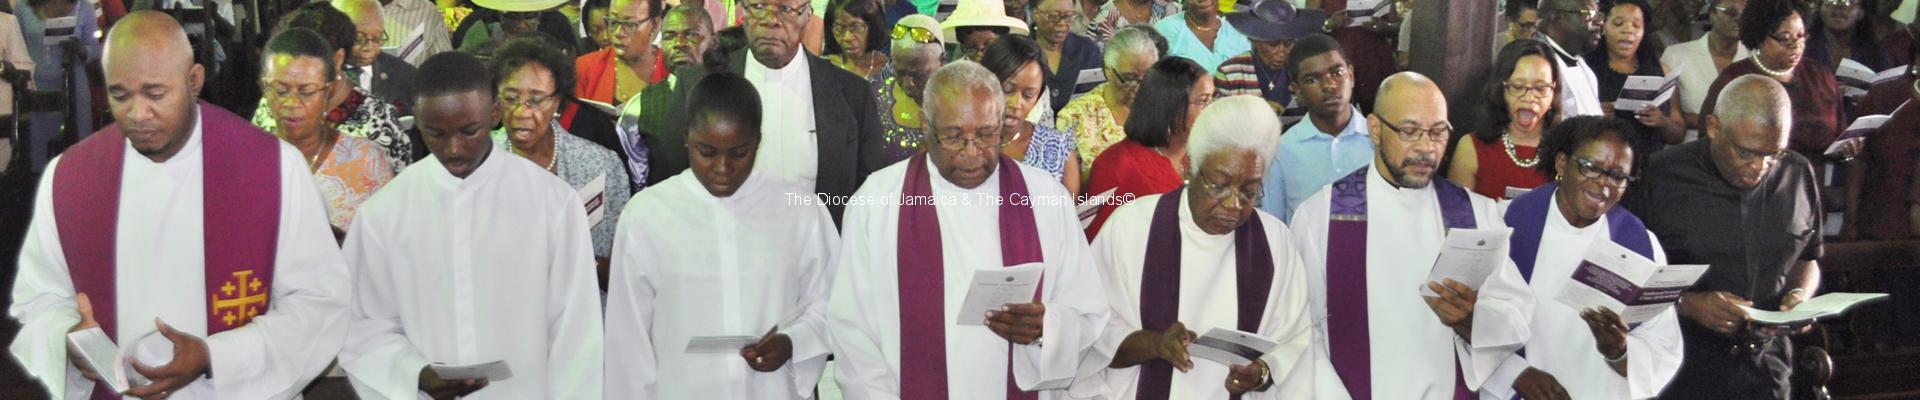 Exhibition on Cathedral Opened in Spanish Town